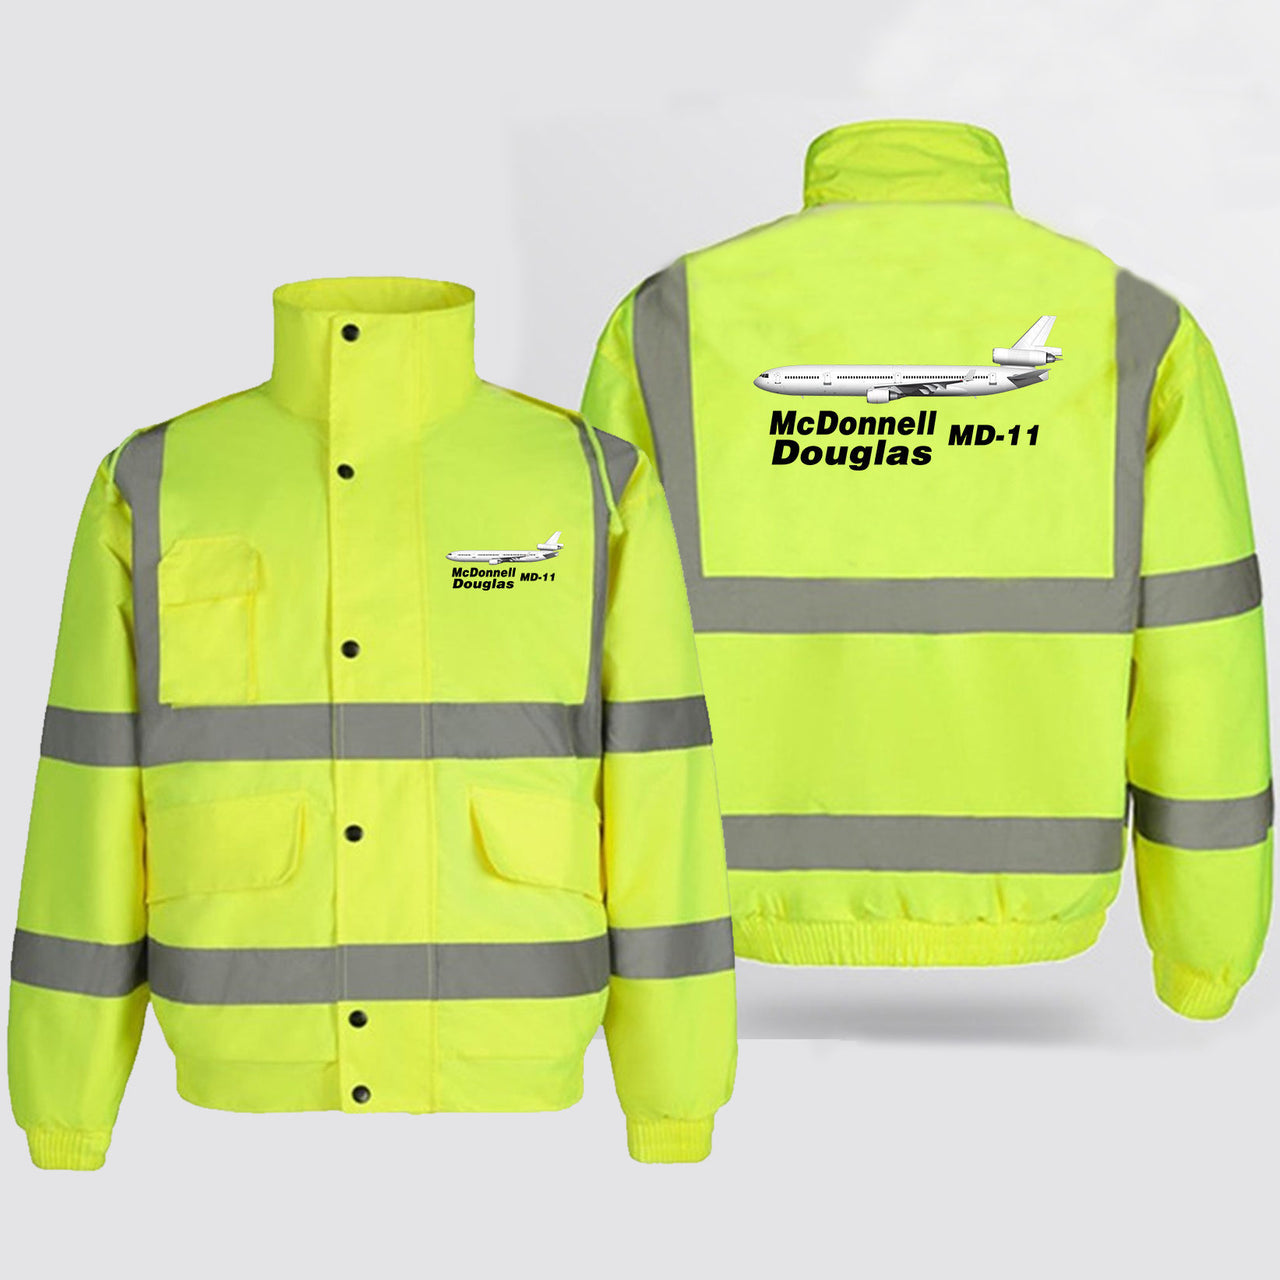 The McDonnell Douglas MD-11 Designed Reflective Winter Jackets